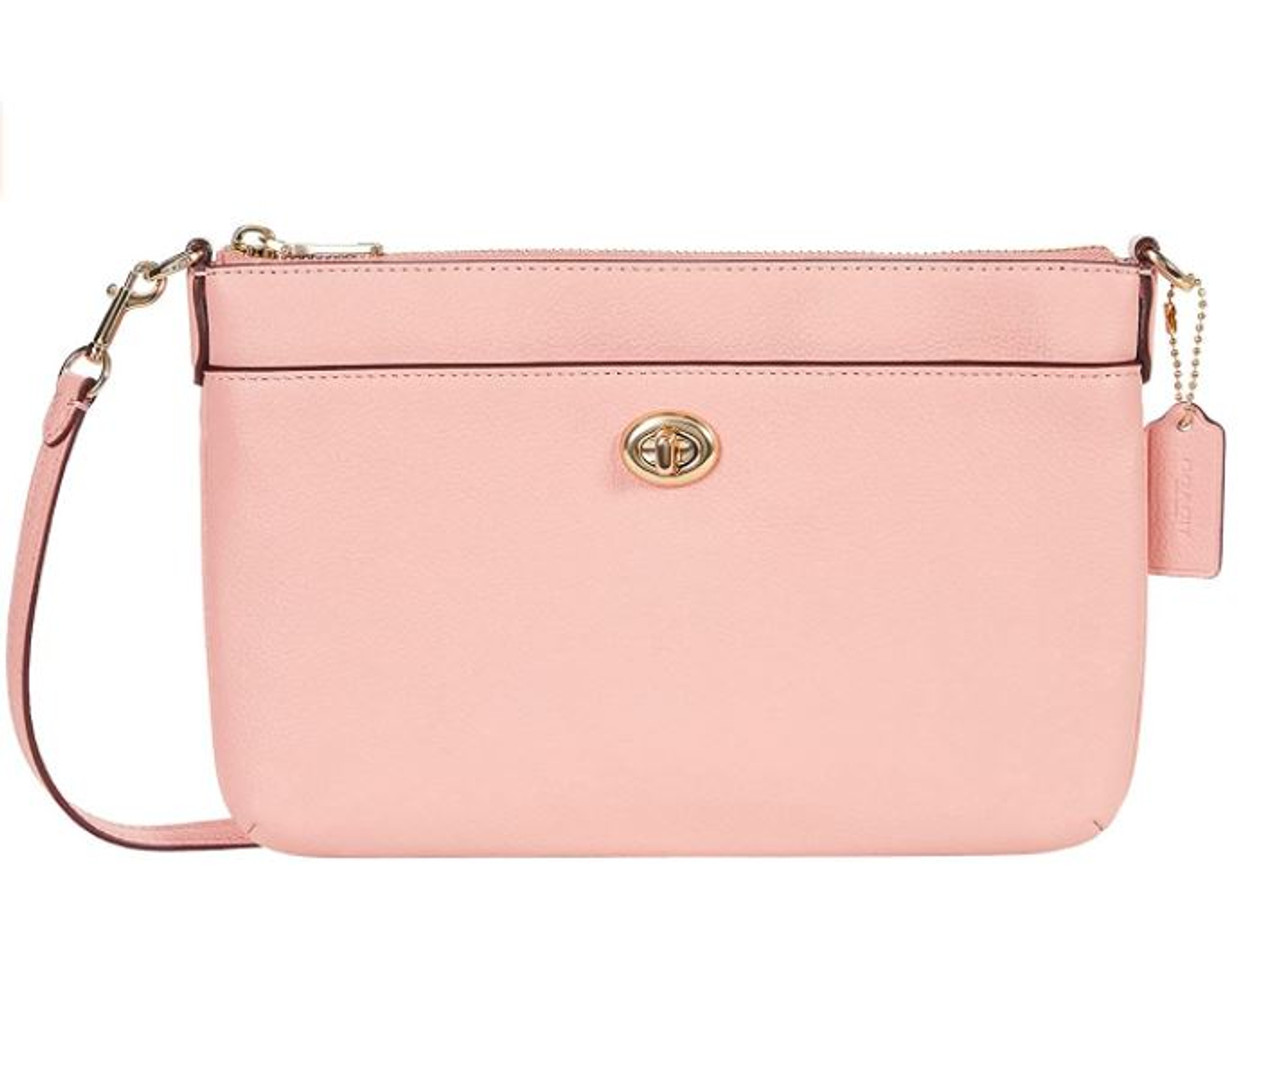 COACH Exclusive NAW Polished Pebble Polly Crossbody Candy Pink One Size  C3376-GDRZH - AllGlitters